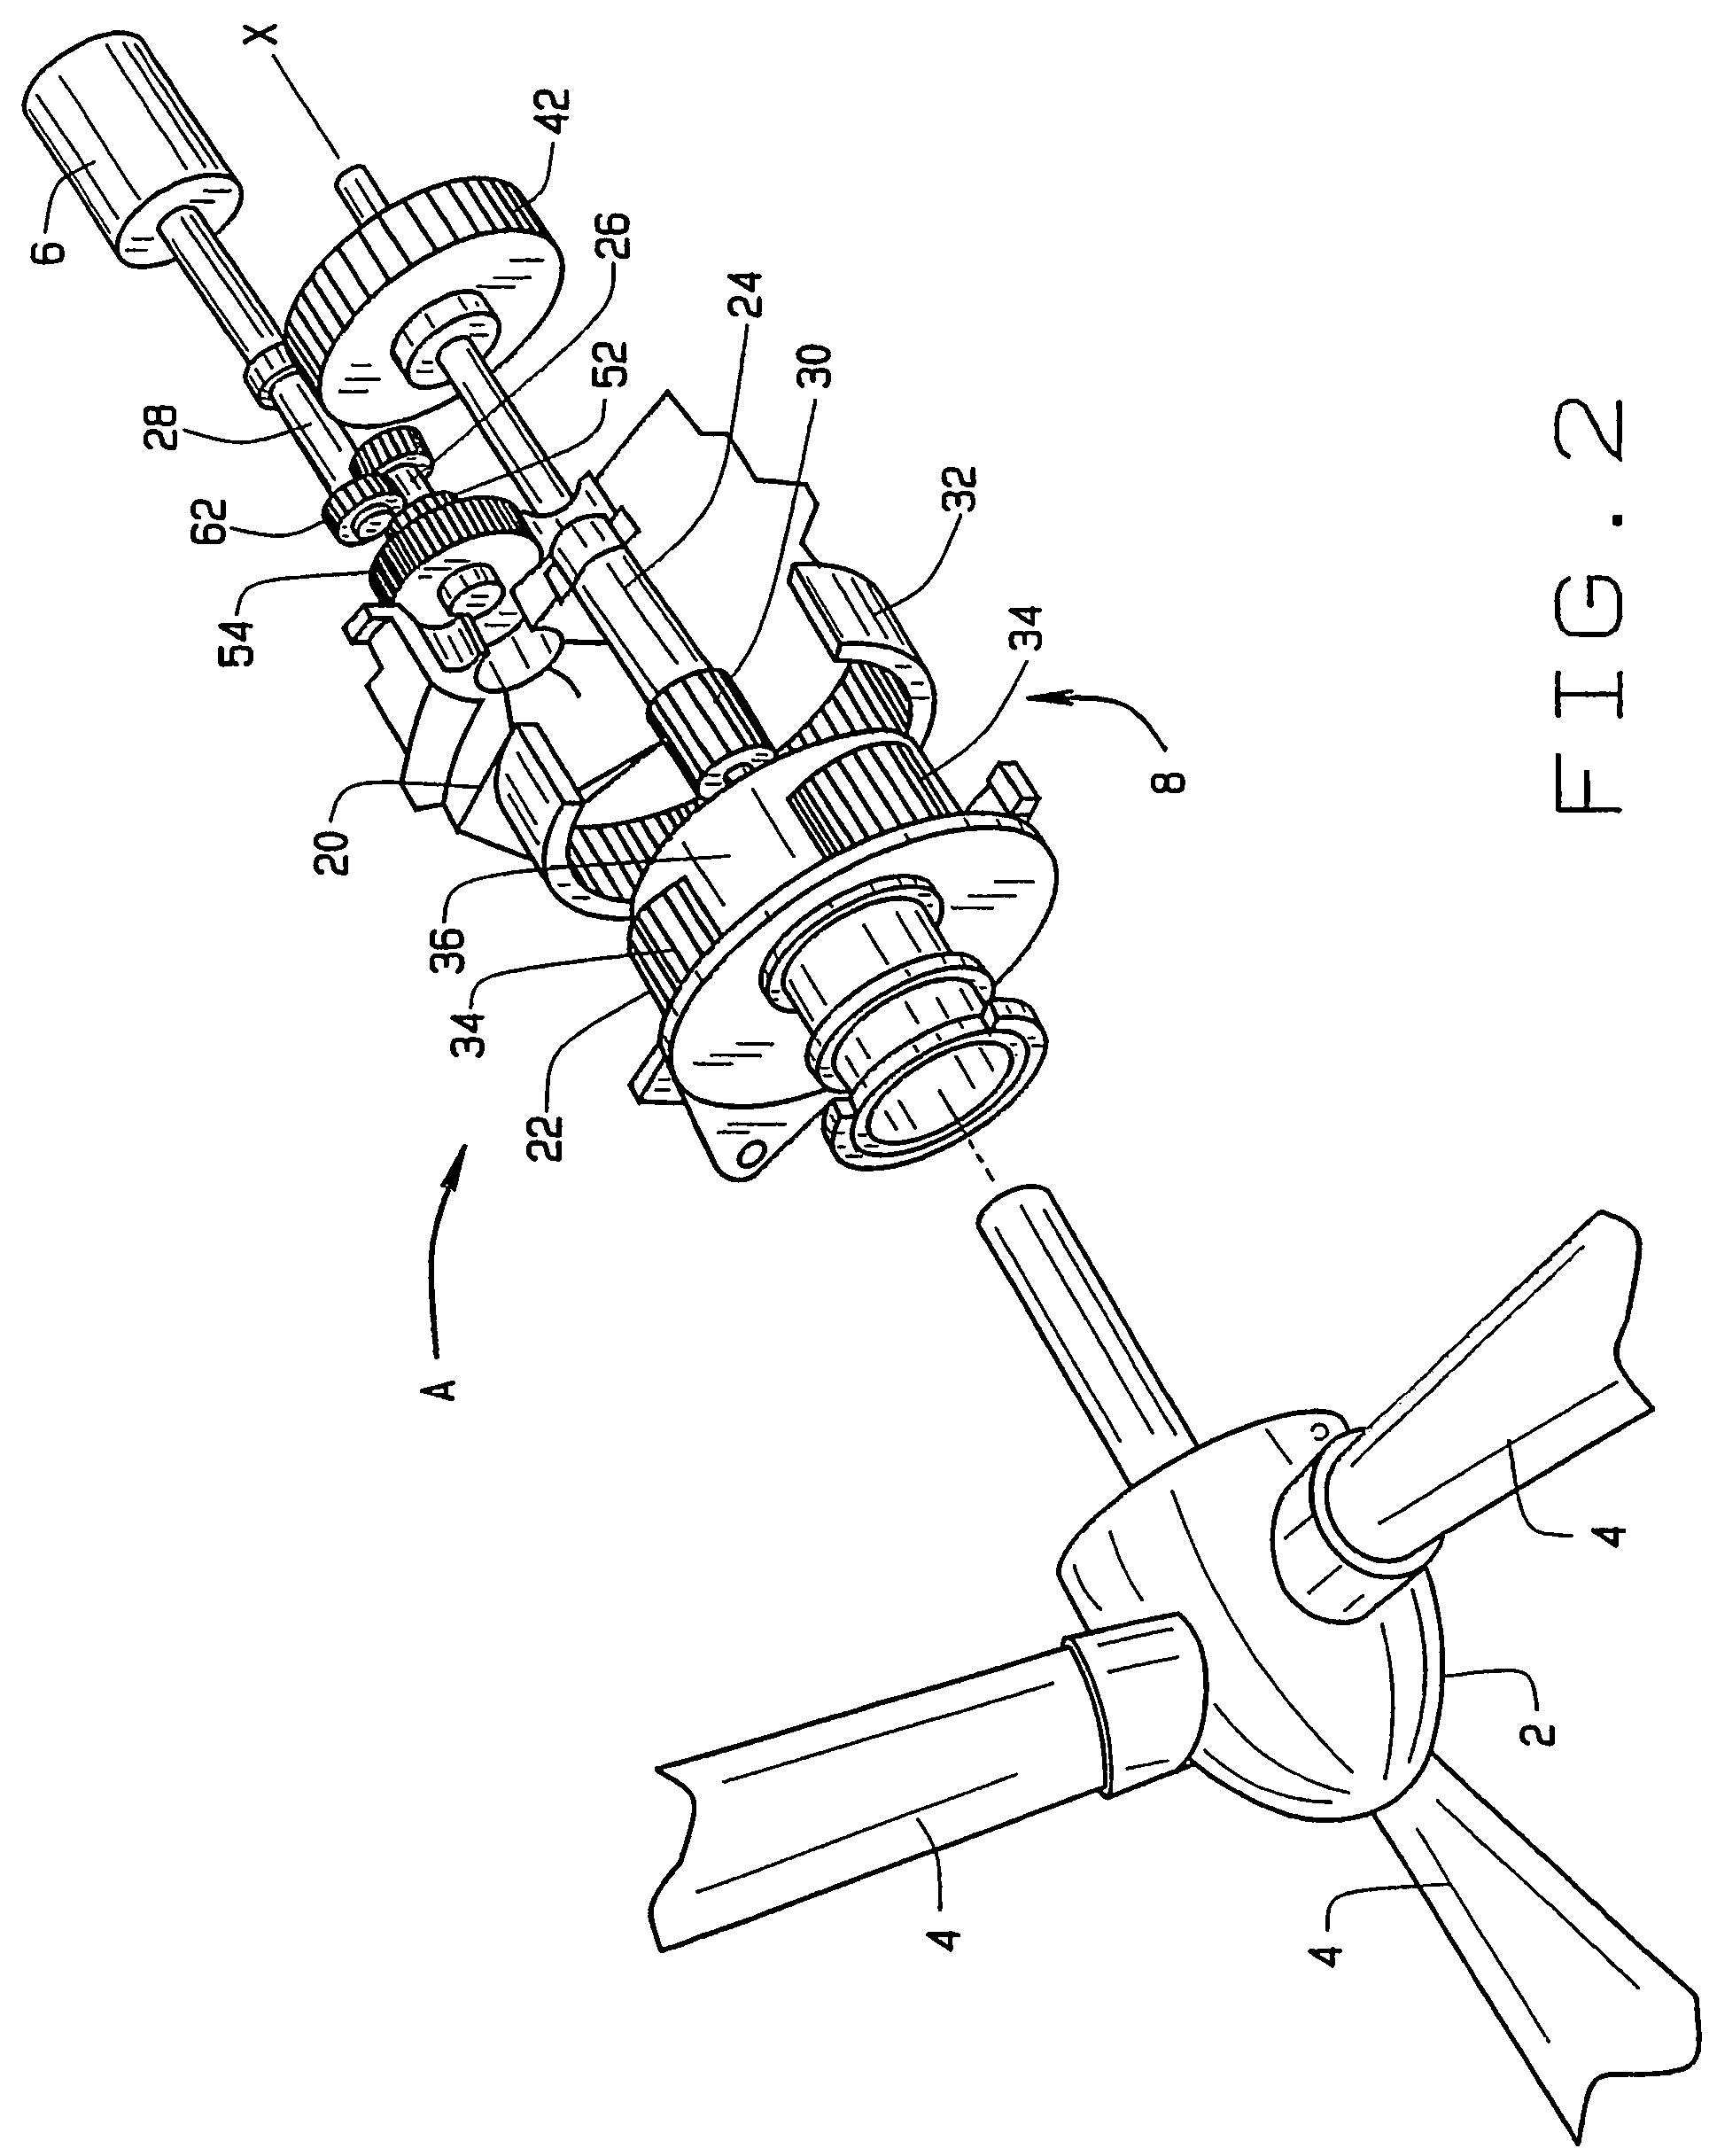 Transmission containing helical gearing and bearing arrangement therefor